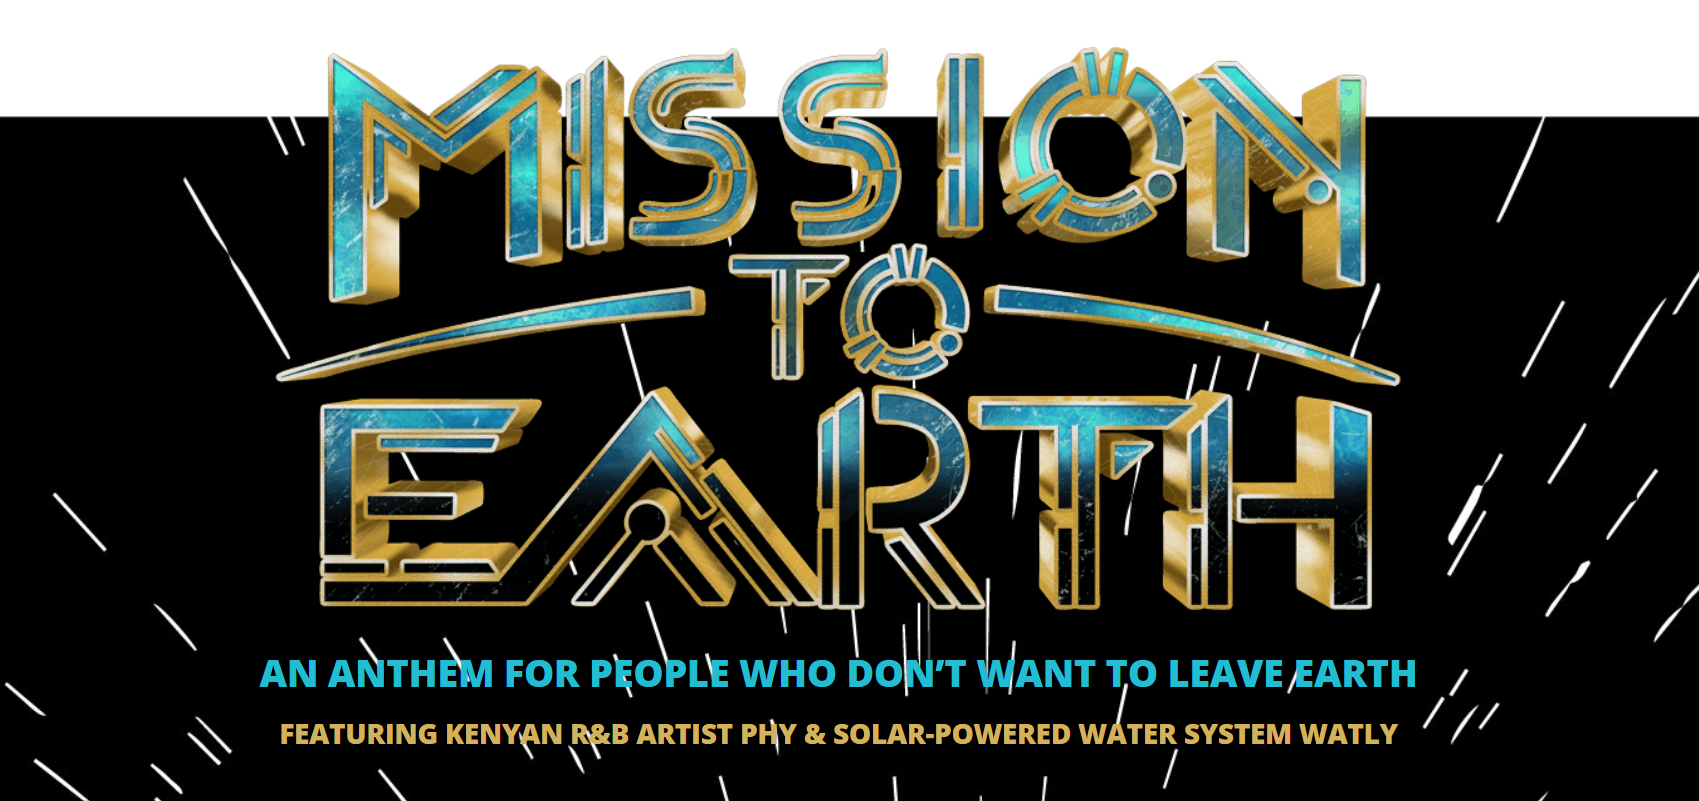 Mission To Earth Text